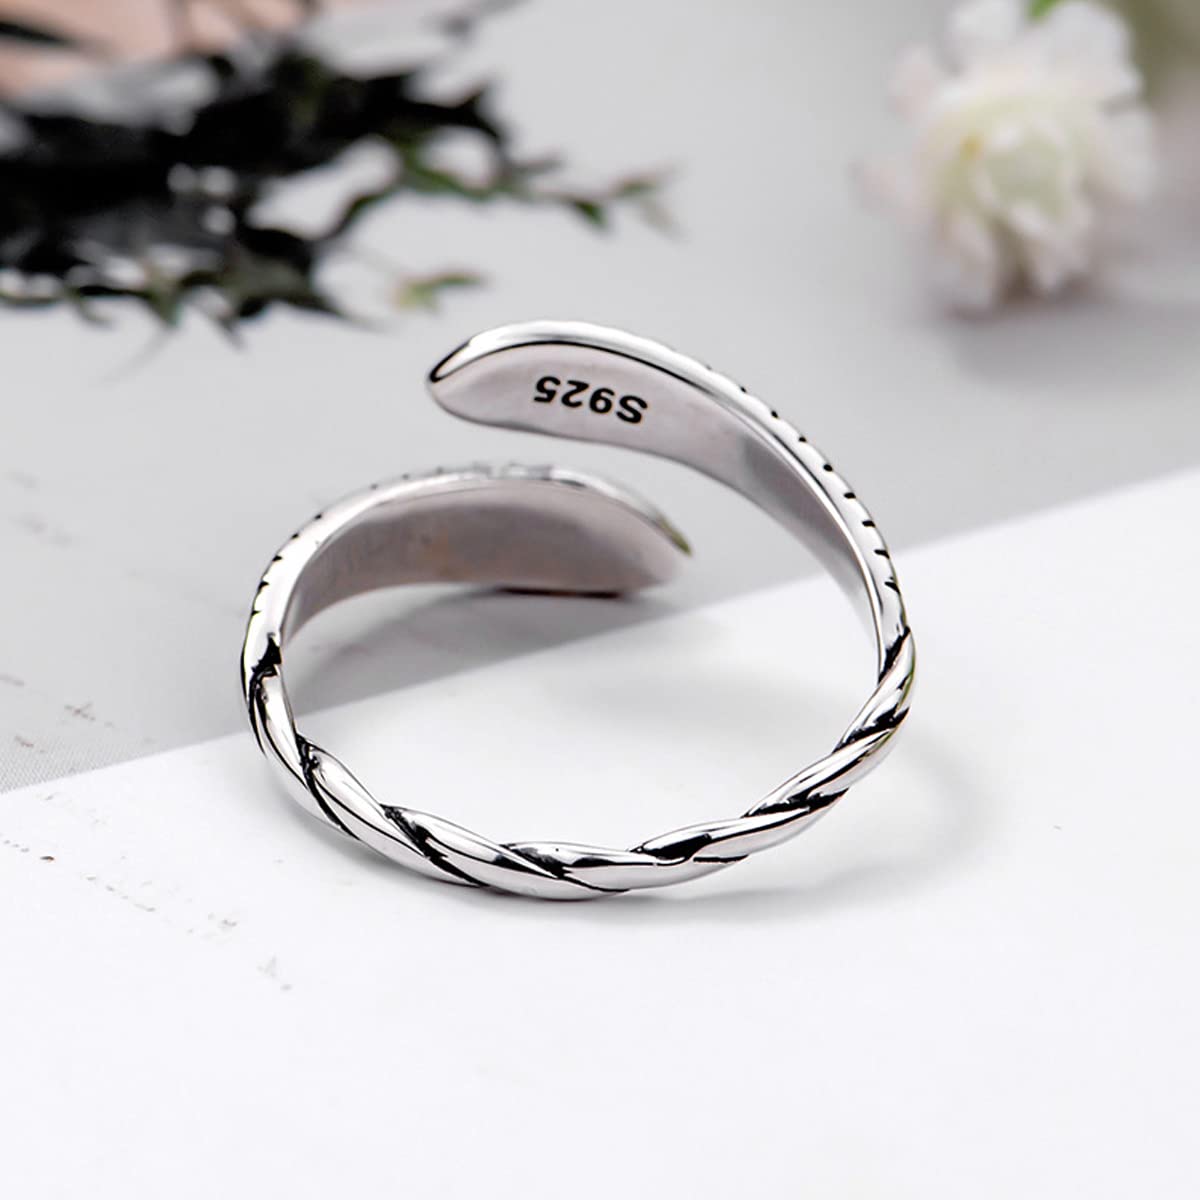 PSP SILVER PURE SILVER 925 WEDDING BAND ( THUMB RING ) SIZE 8 FOR MEN WOMEN  Silver Ring Price in India - Buy PSP SILVER PURE SILVER 925 WEDDING BAND (  THUMB